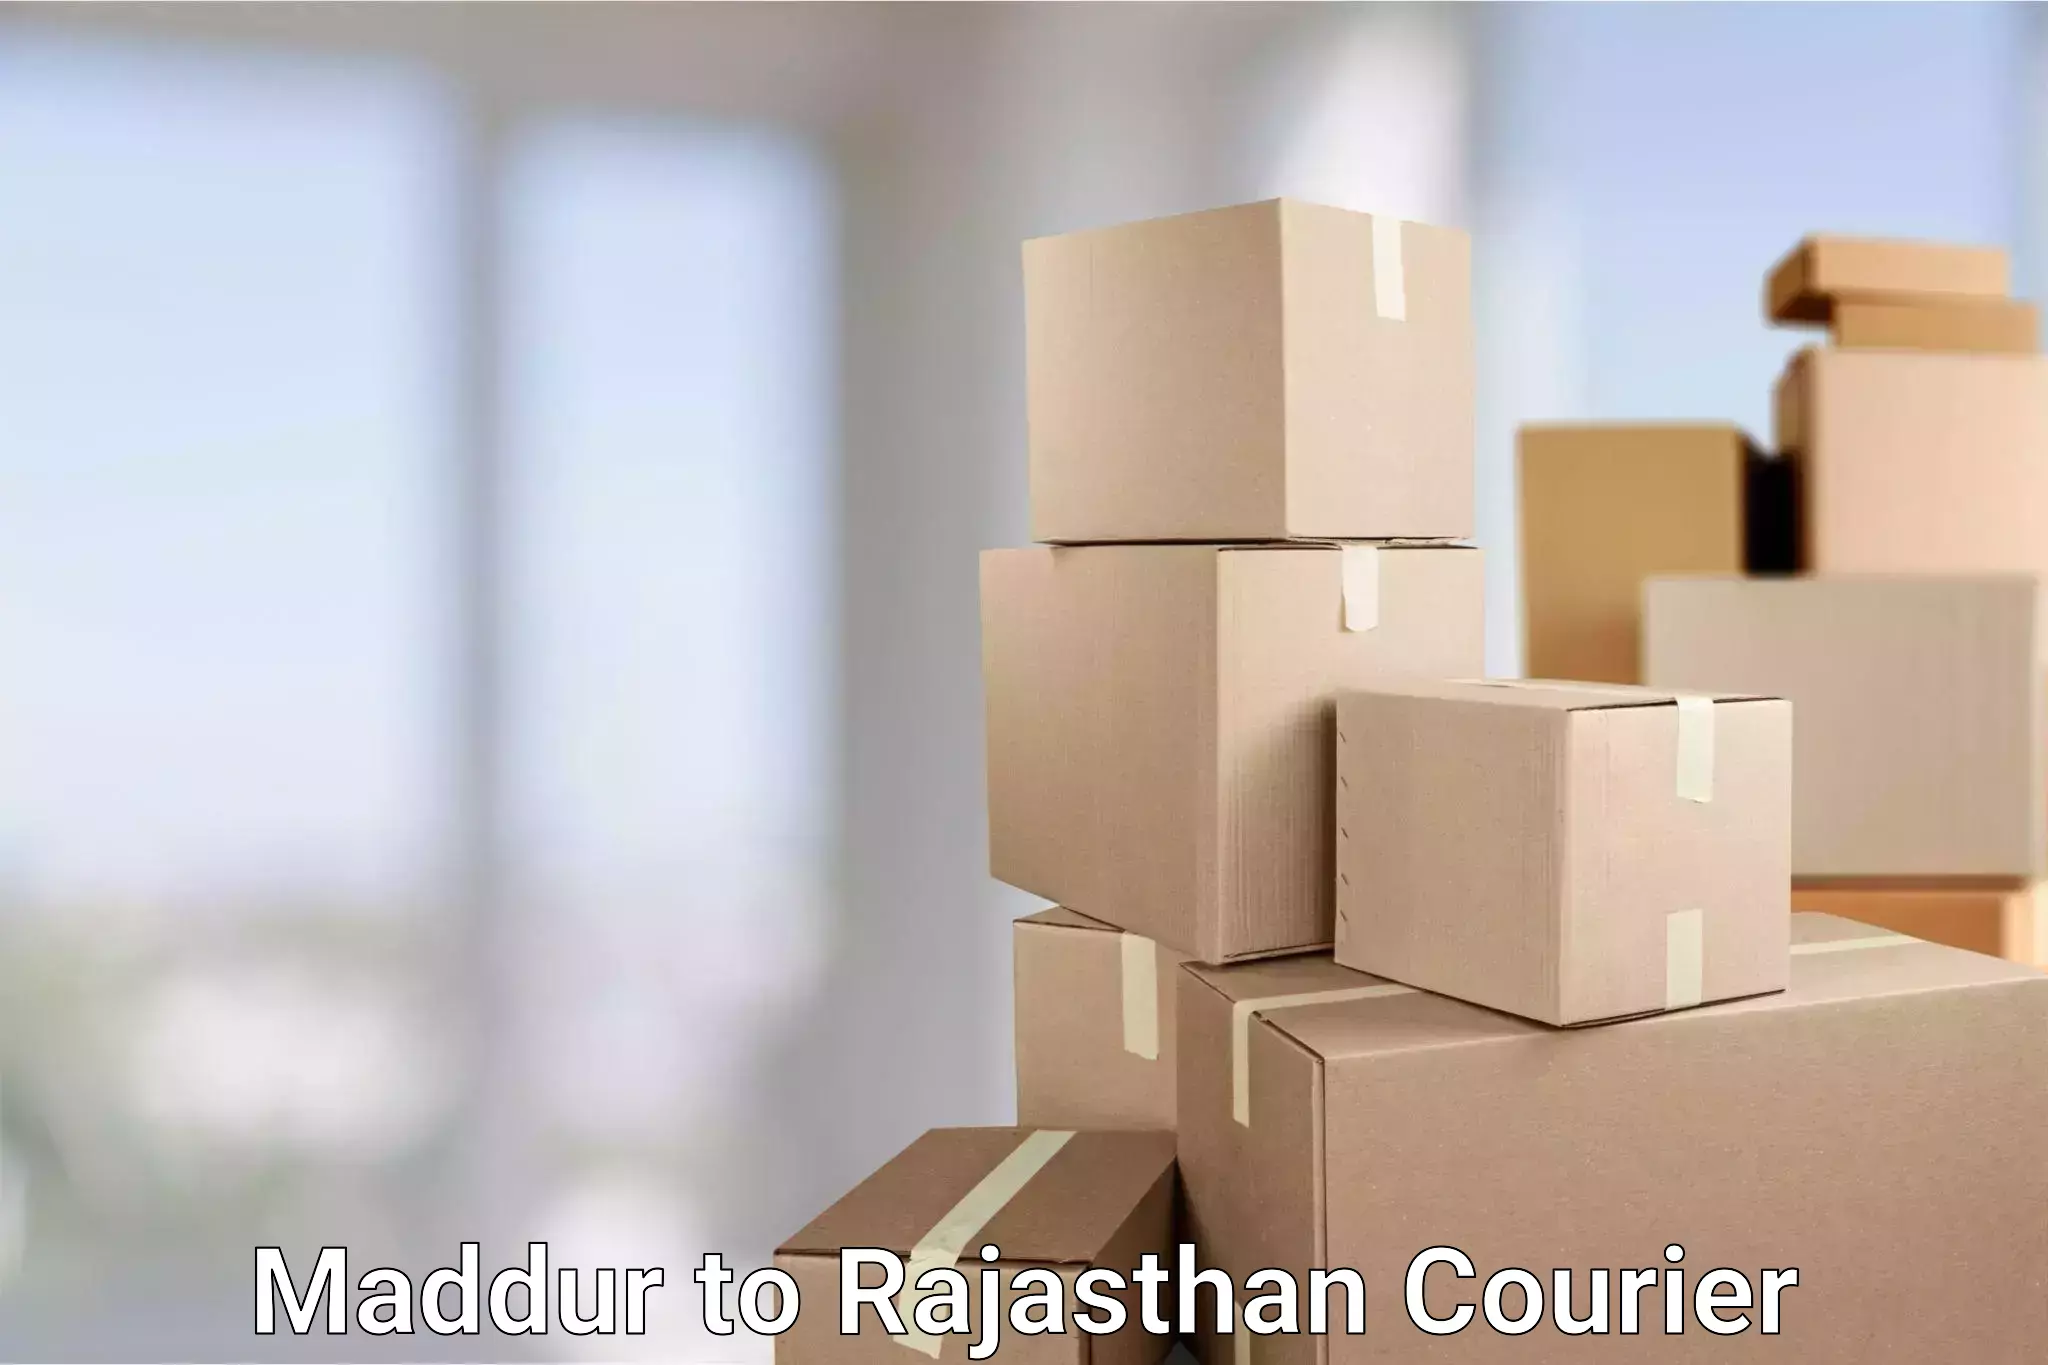 Business delivery service Maddur to Yeswanthapur